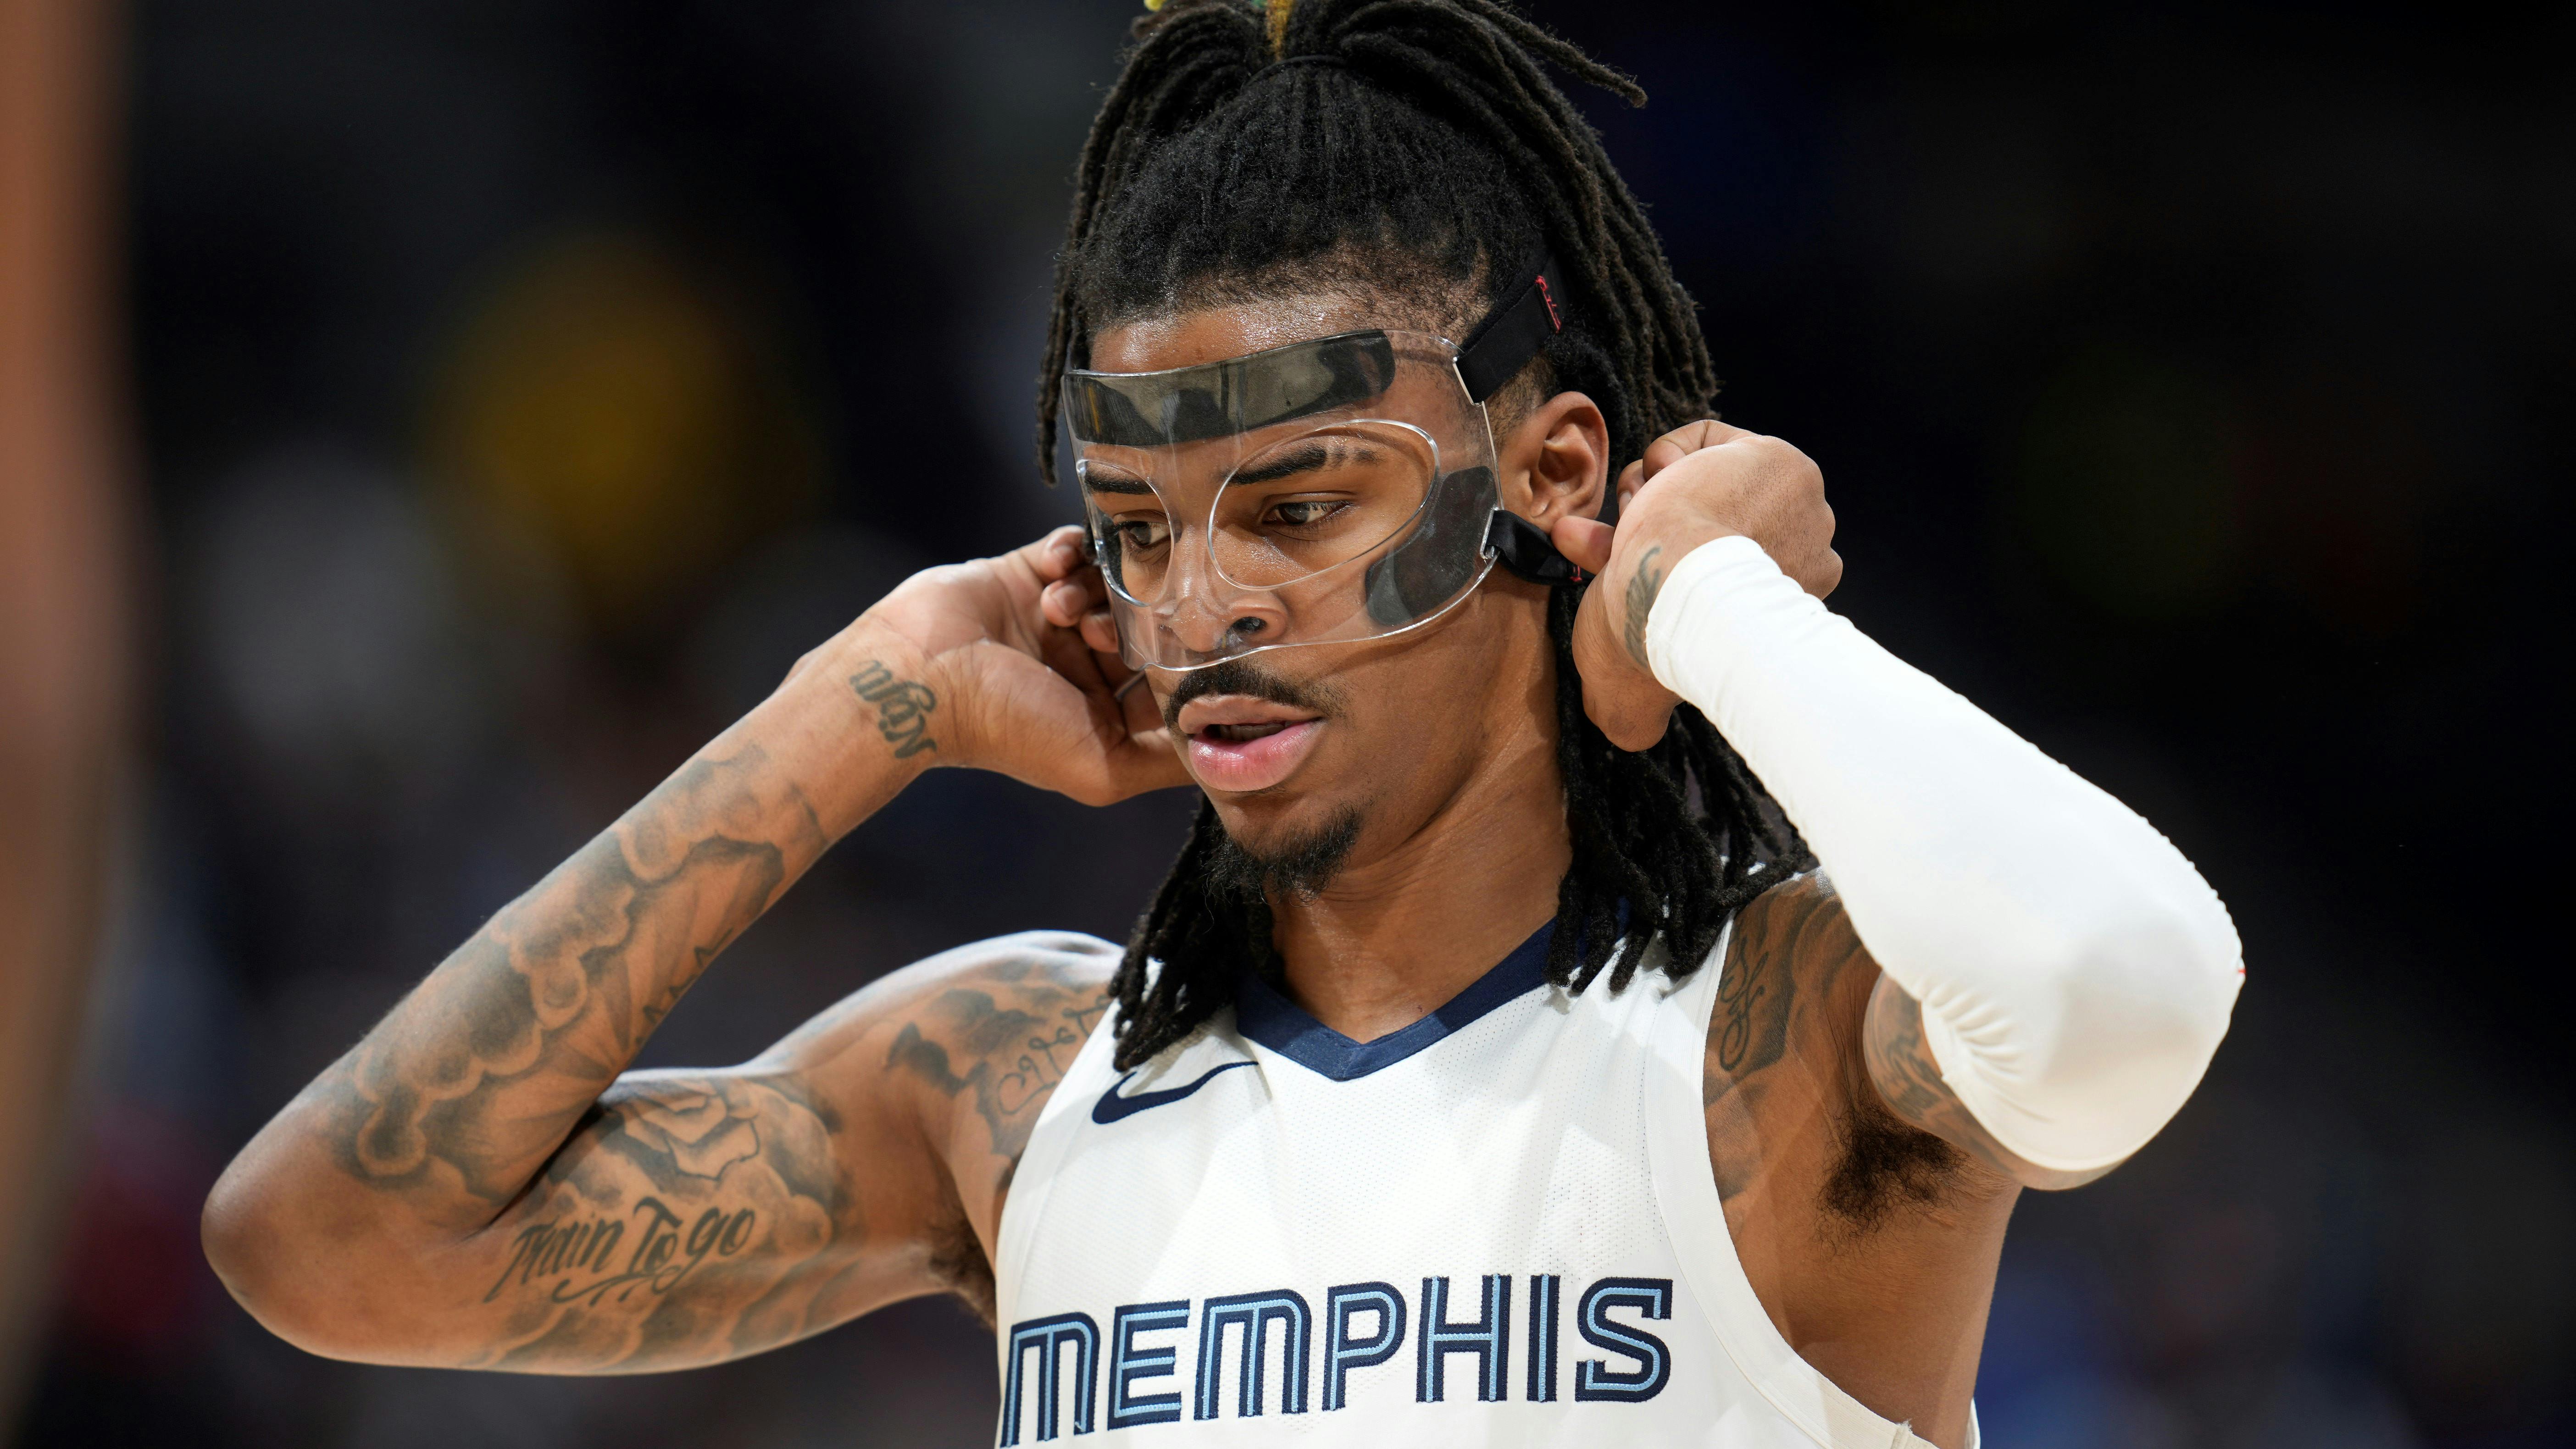 Grizzlies might be in trouble as beleaguered superstar Ja Morant enters counseling program